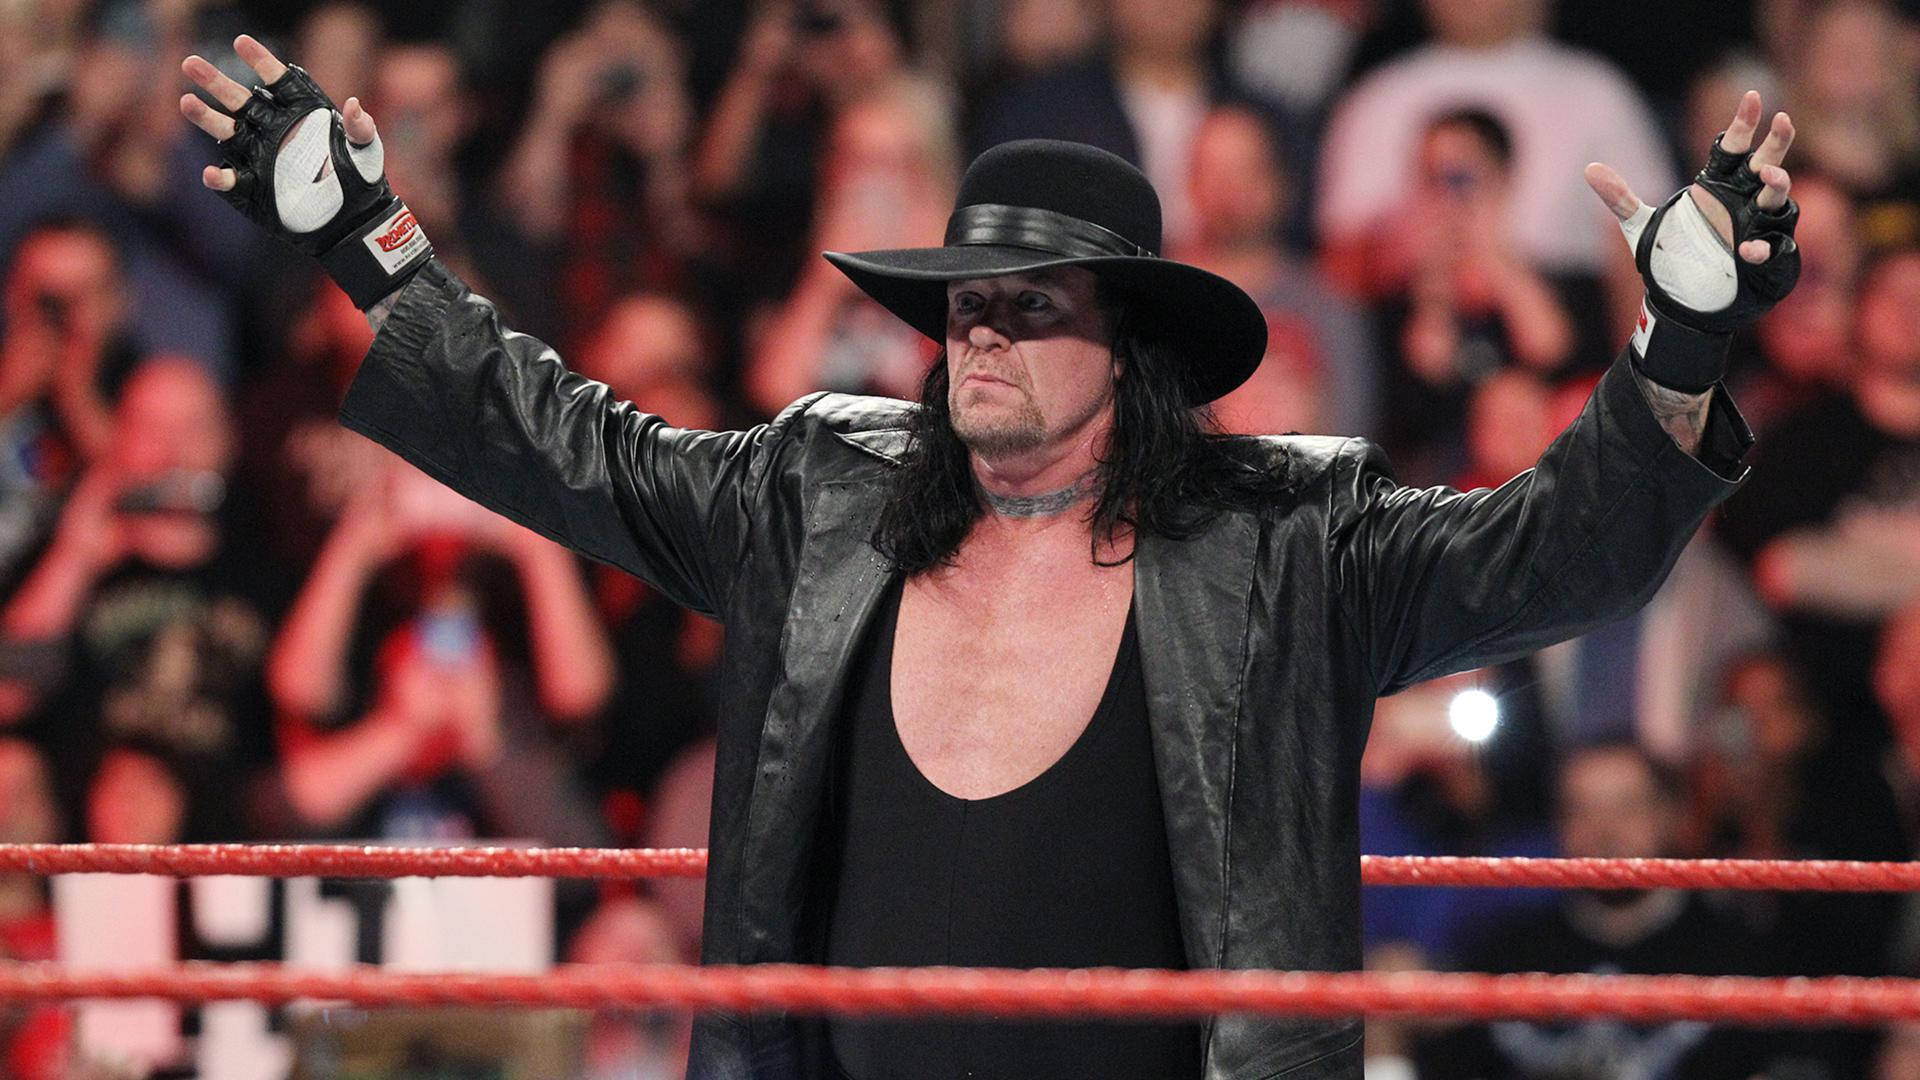 The Undertaker In The Ring Wallpaper